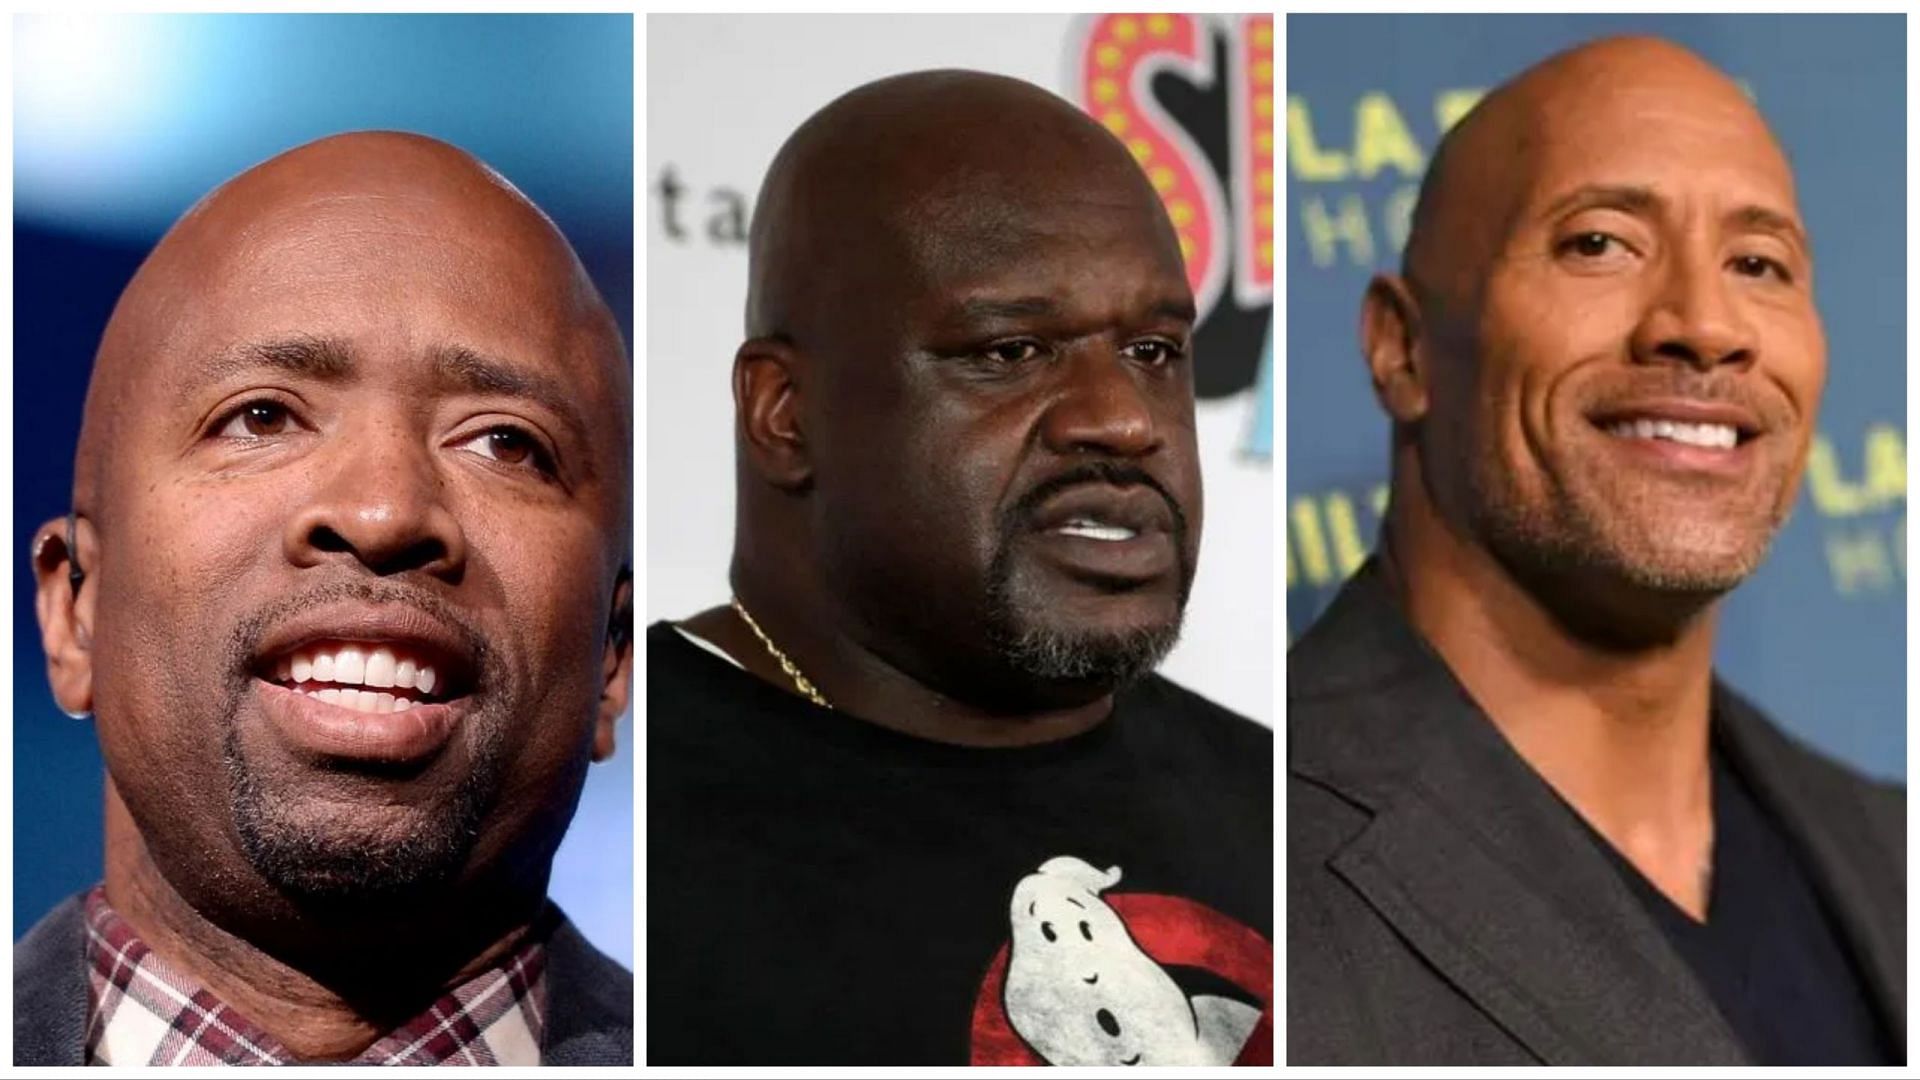 Kenny Smith (left) hilariously accuses Shaquille O